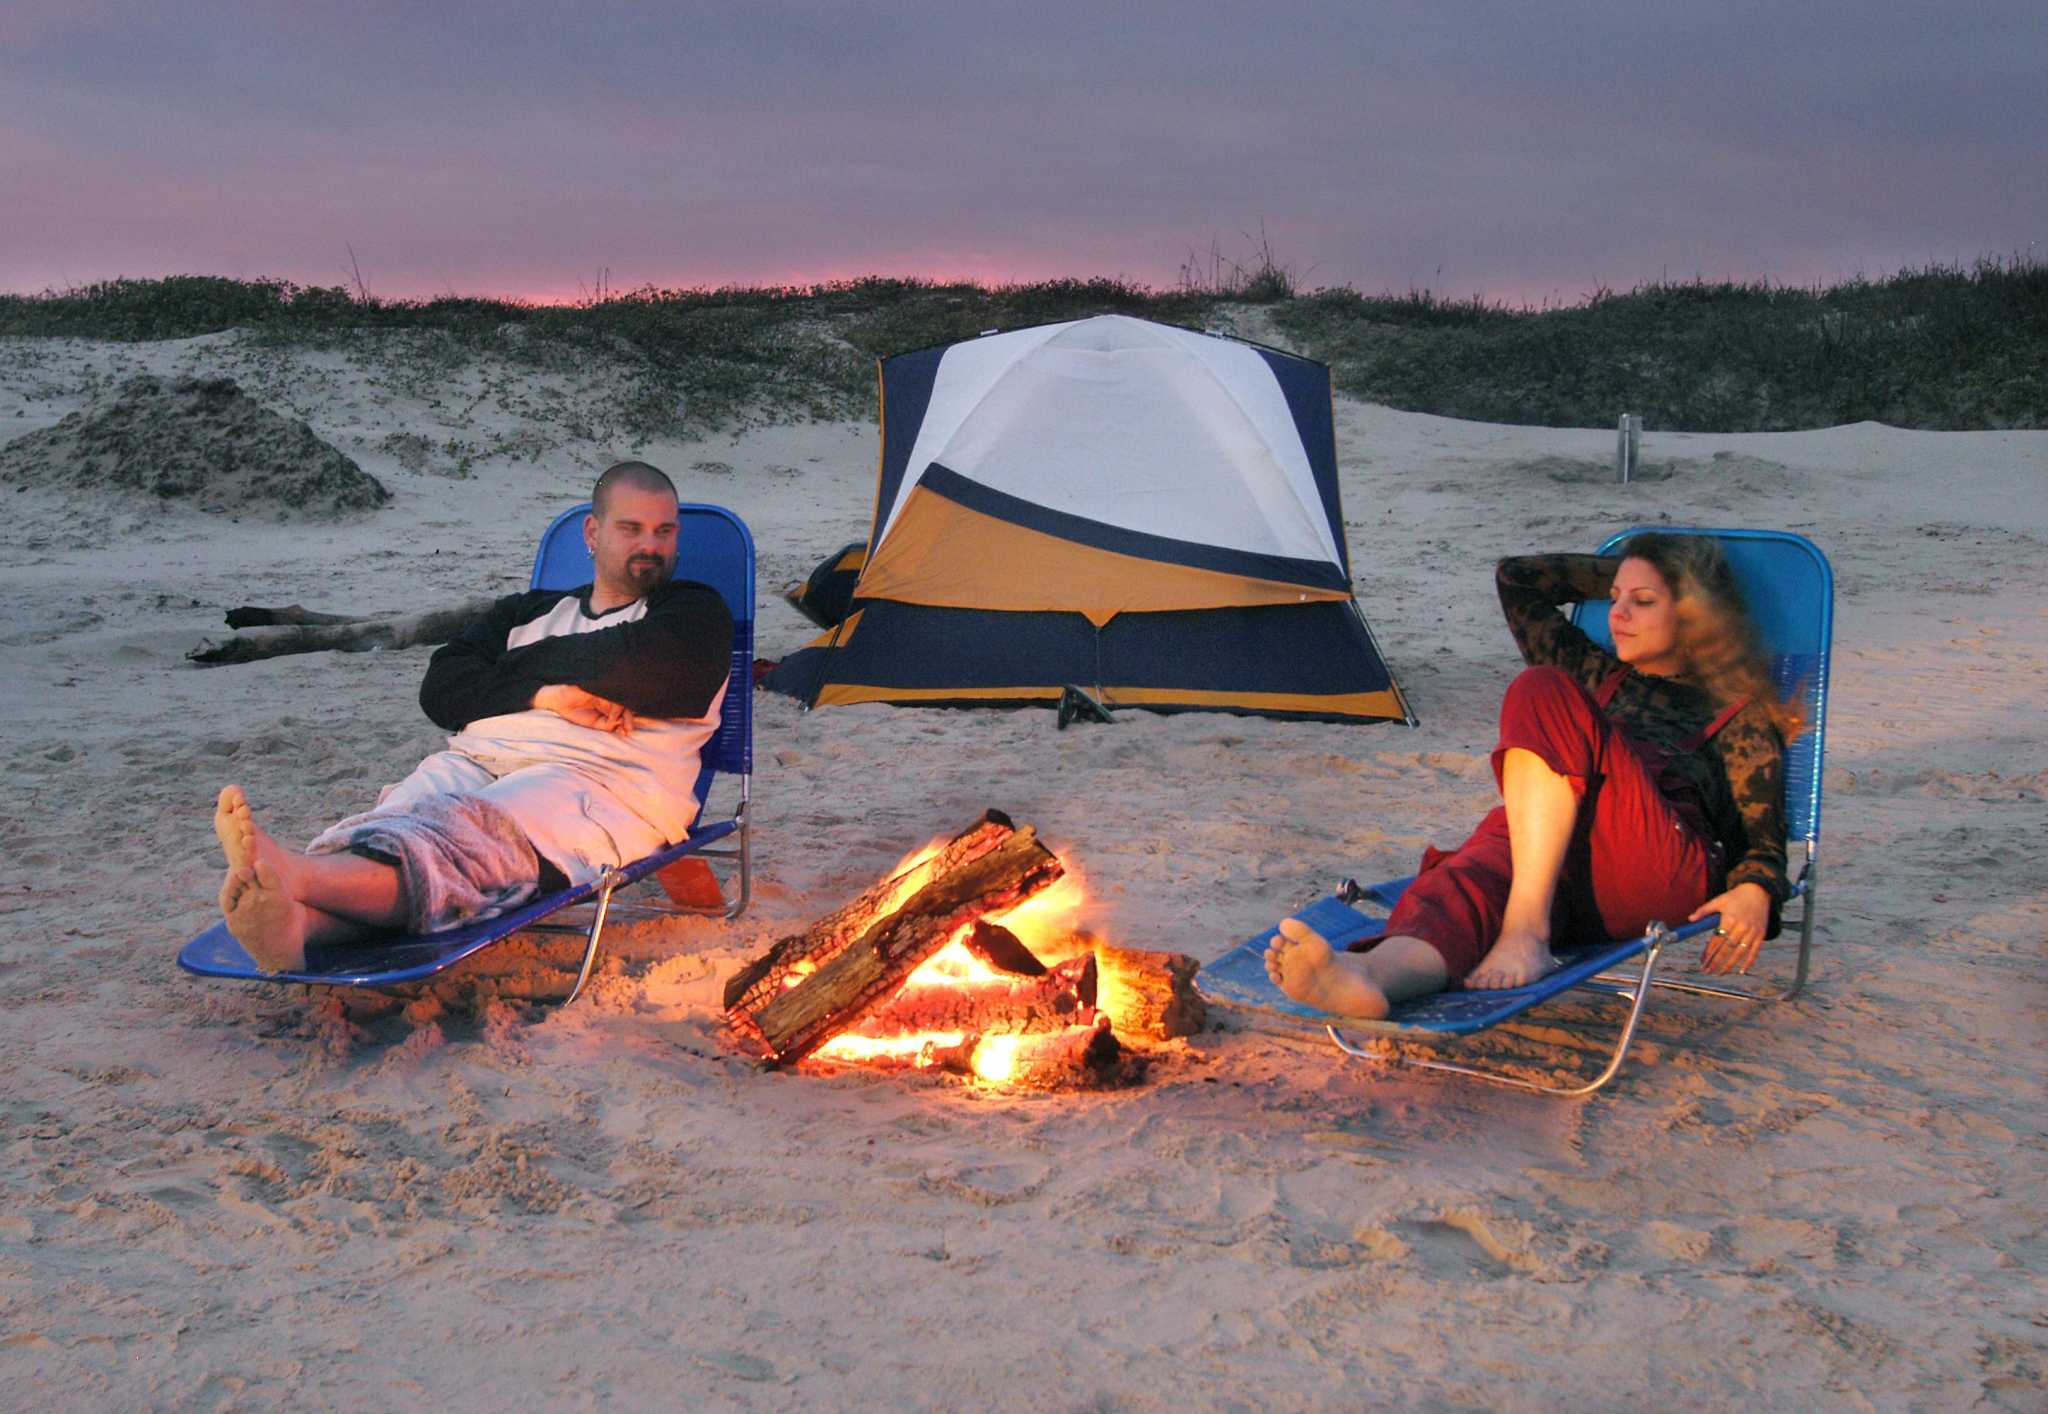 Texas State Parks are allowing limited overnight camping starting May 18.